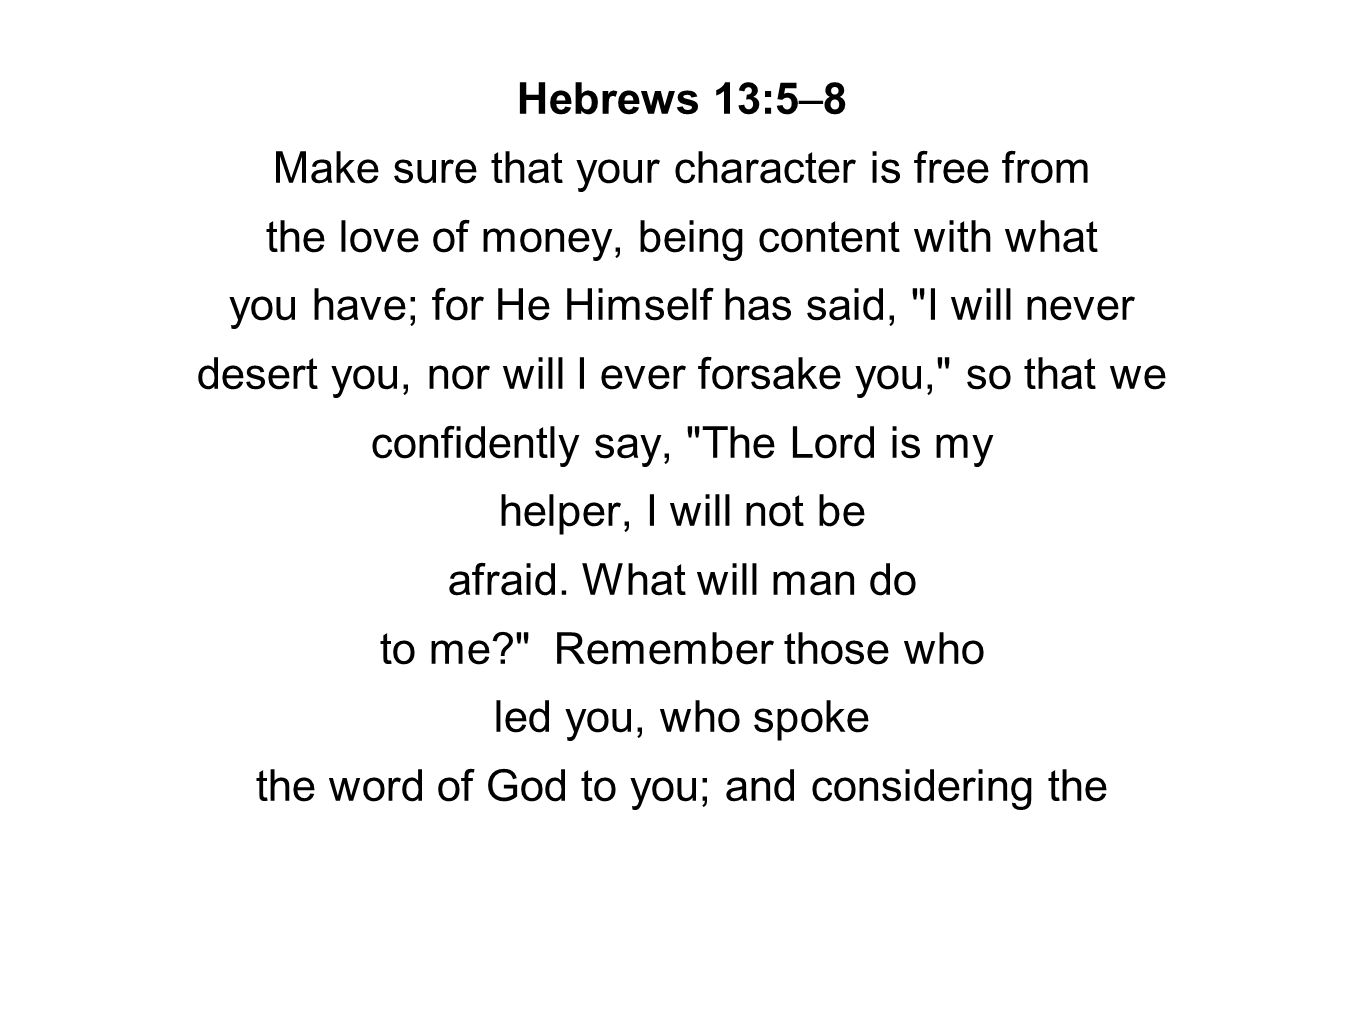 Hebrews 13:5–8 Make sure that your character is free from the love of money, being content with what you have; for He Himself has said, I will never desert you, nor will I ever forsake you, so that we confidently say, The Lord is my helper, I will not be afraid.